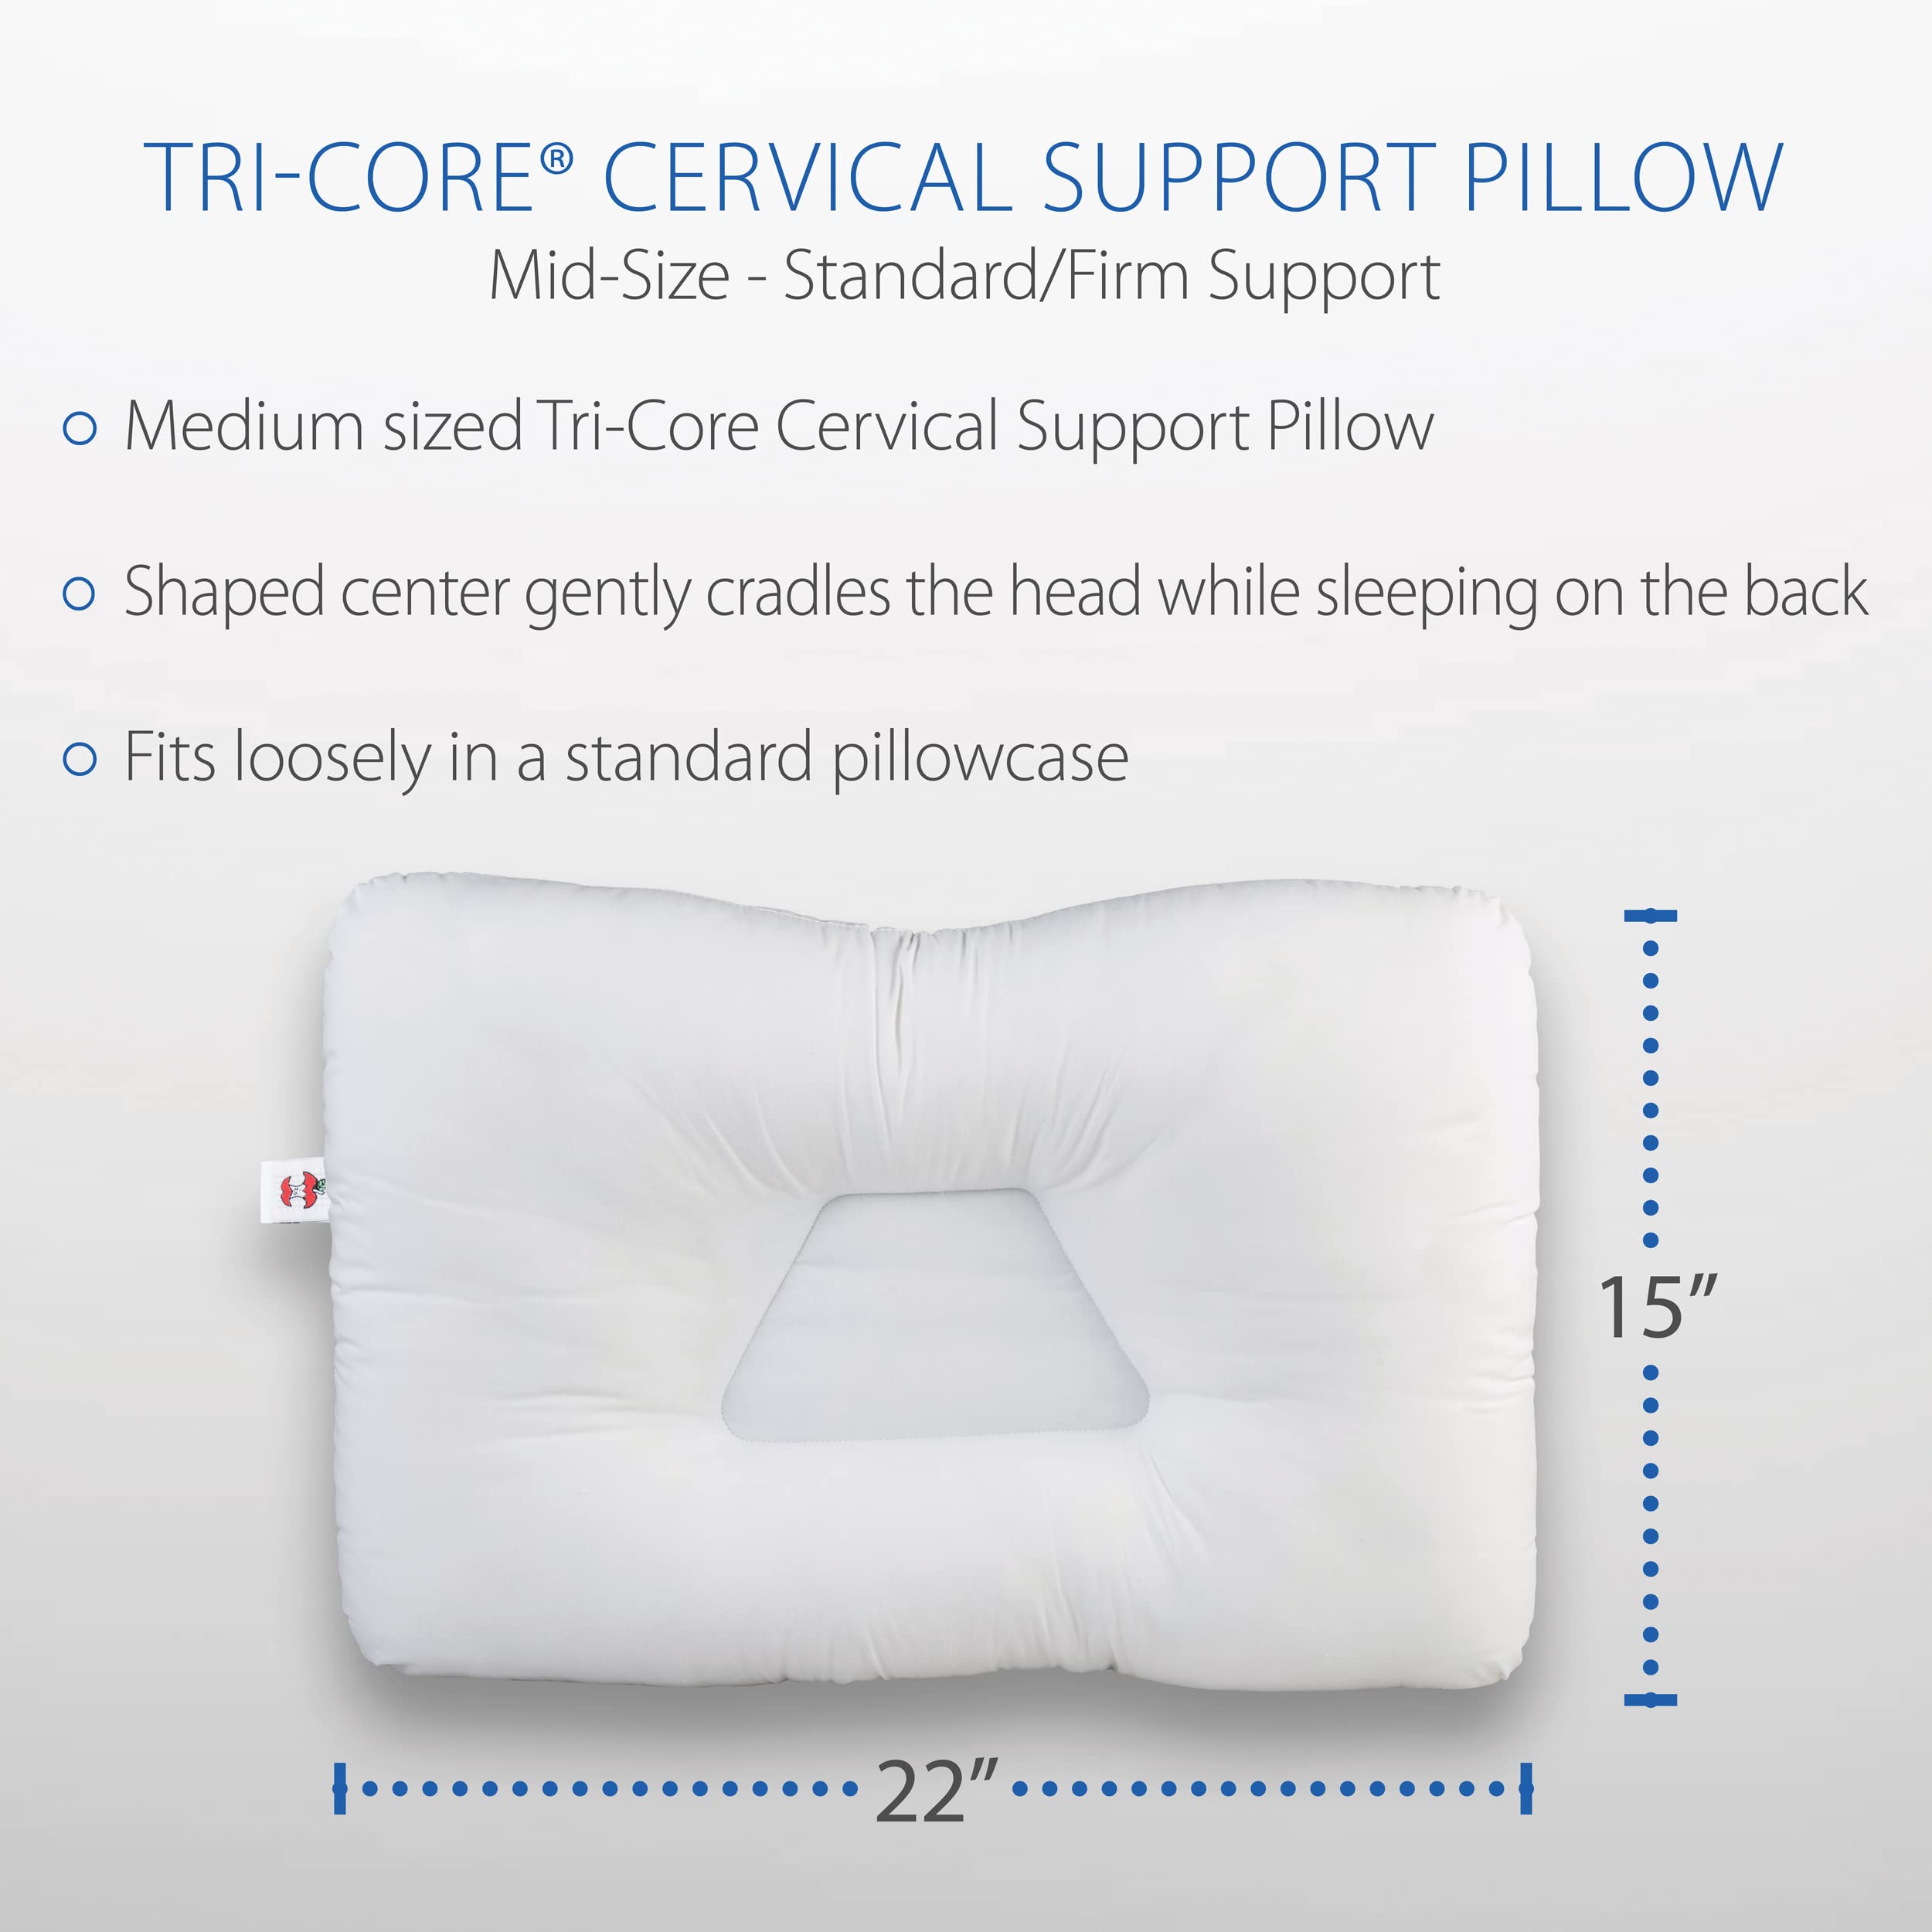 Core Products Tri-Core Cervical Support Pillow for Neck, Shoulder, and Back Pain Relief; Ergonomic Orthopedic Contour Fiber Bed Pillow for Back and Side Sleepers; Assembled in USA - Firm, Mid-Size